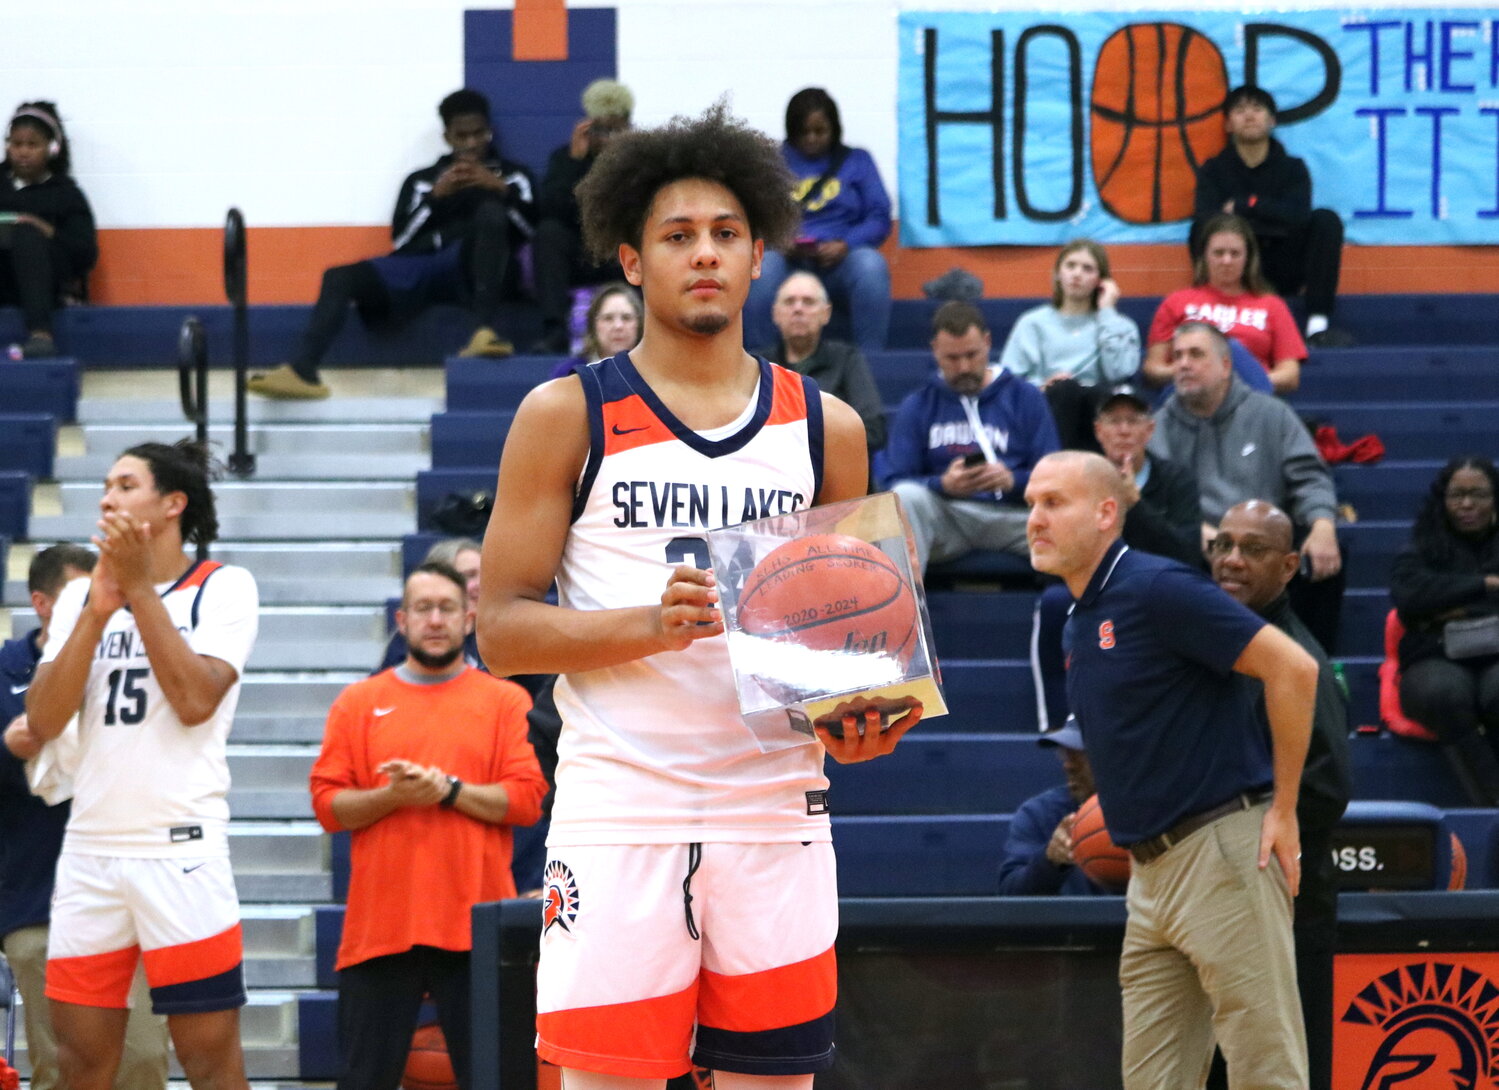 AJ Bates is celebrated as the Seven Lakes career points record holder before Monday's game between Seven Lakes and Pearland Dawson at the Seven Lakes gym.